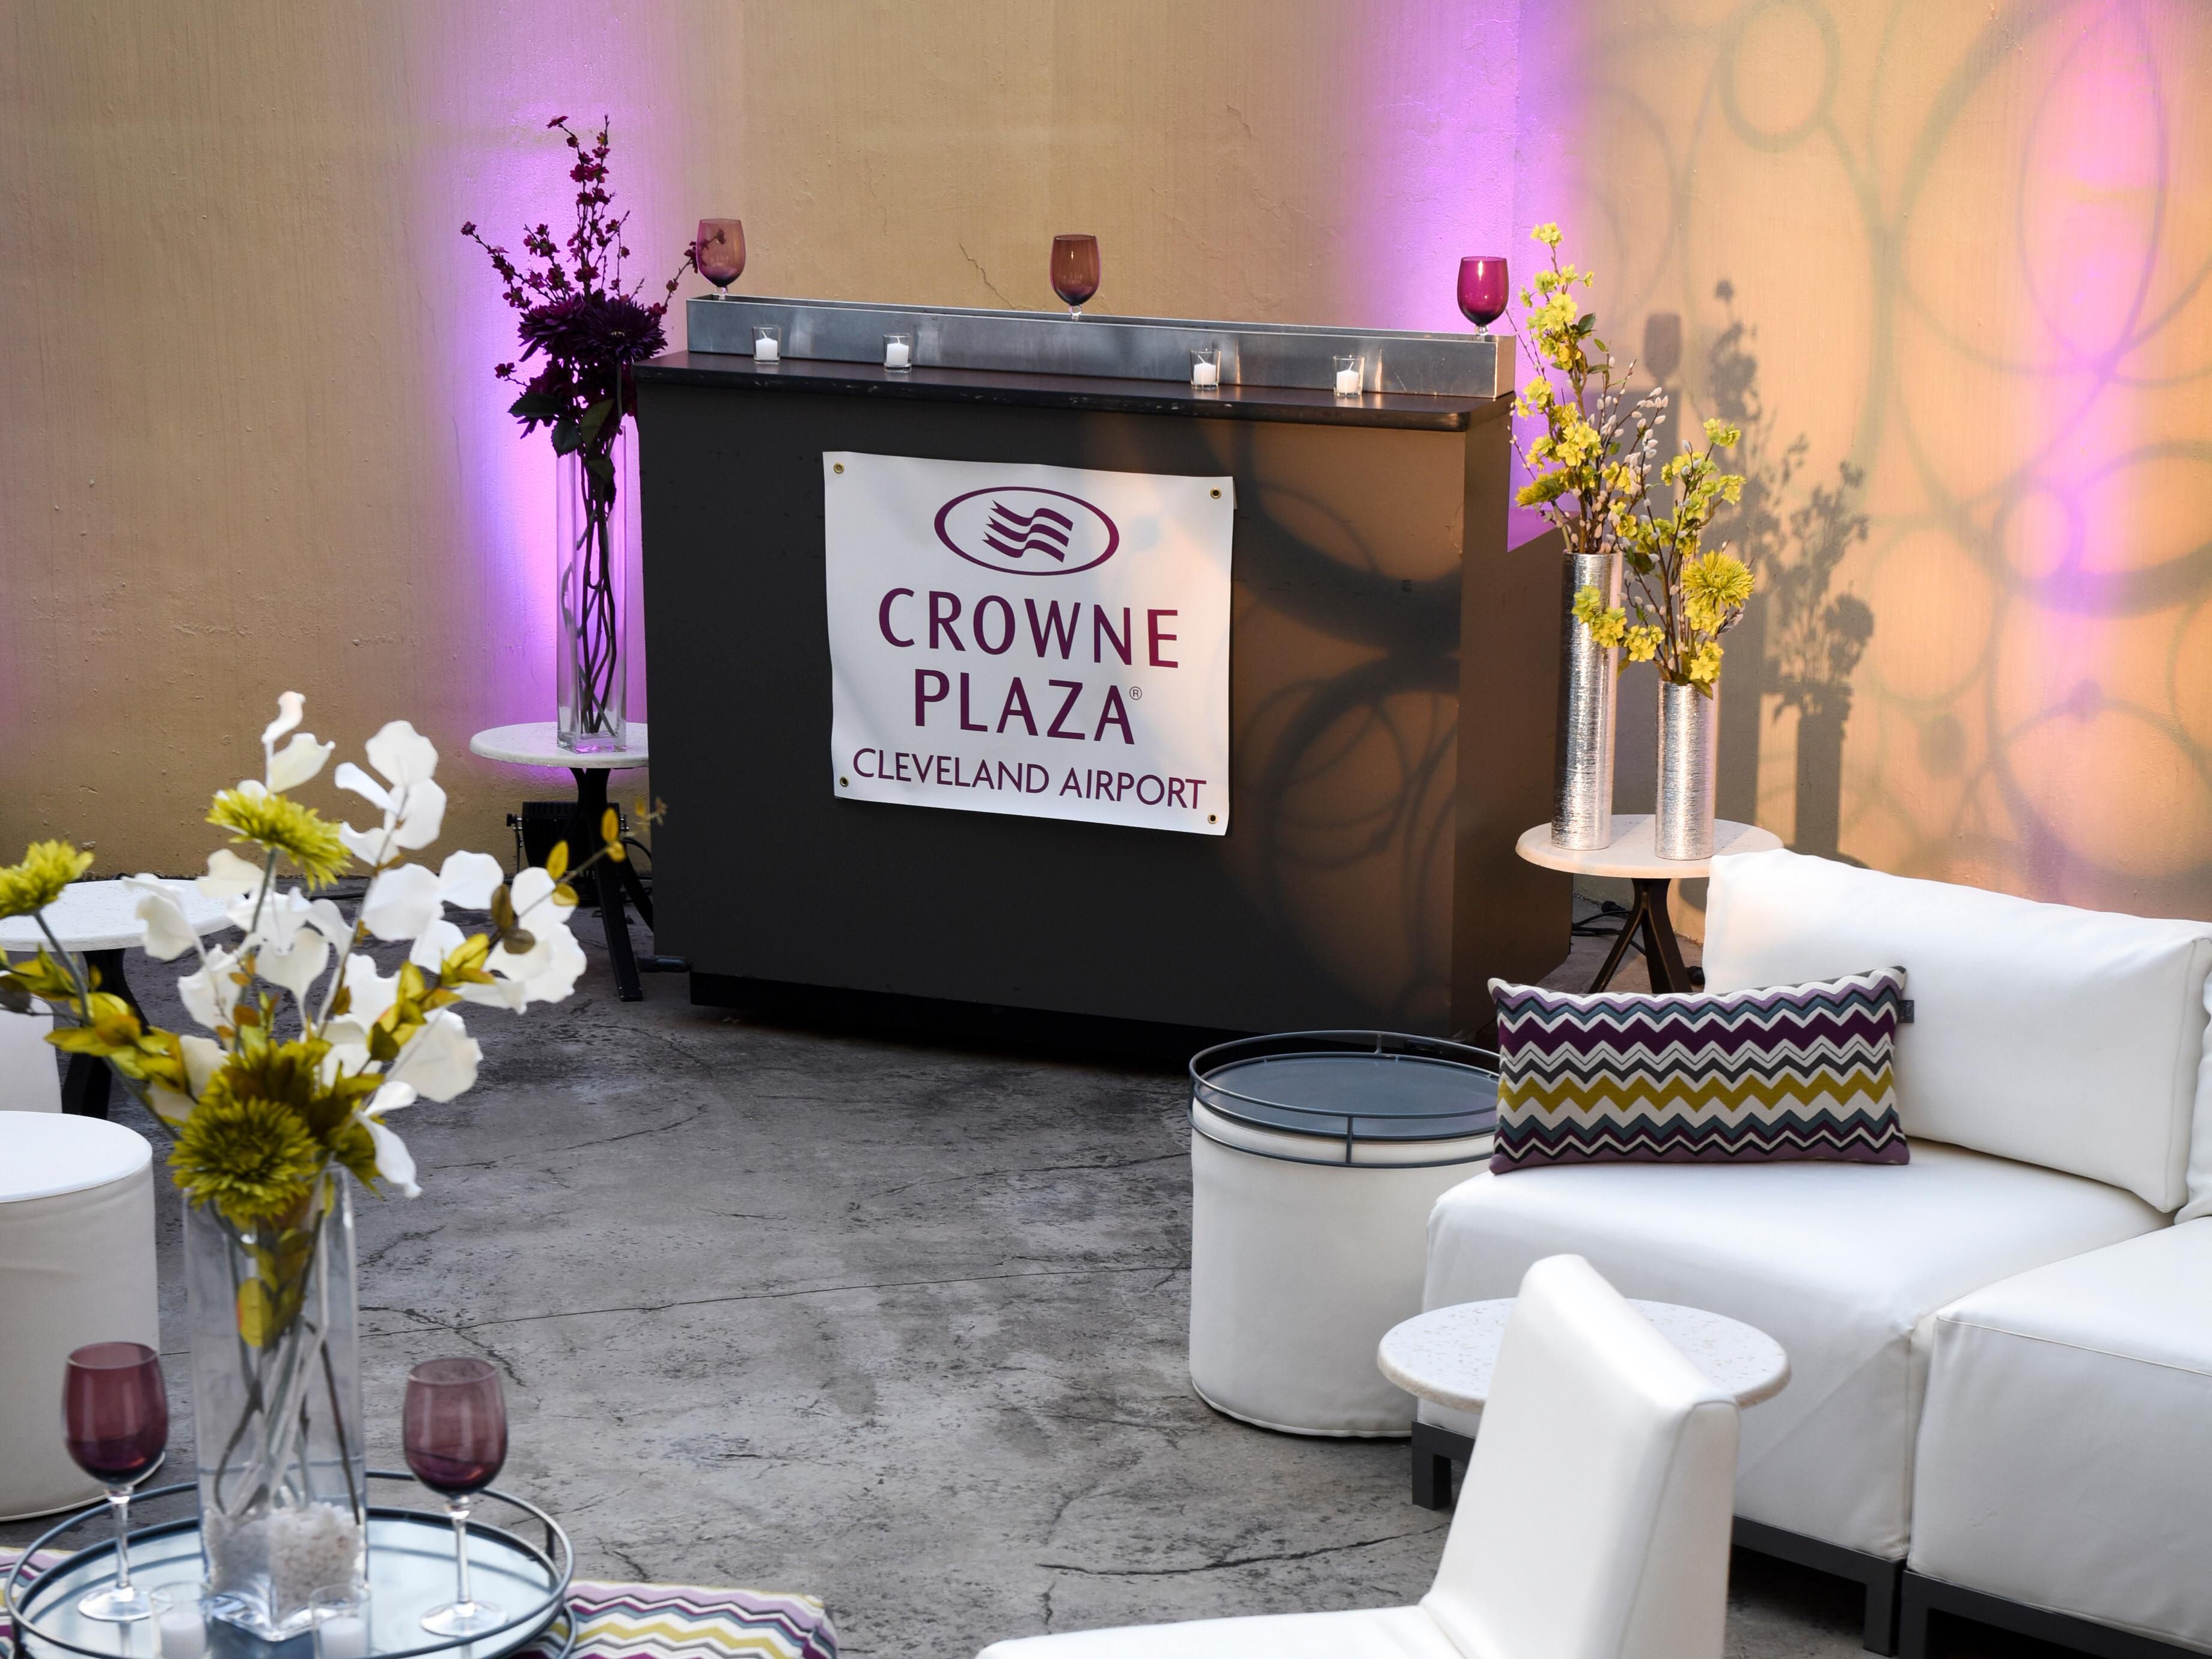 The Crowne Plaza Cleveland Airport provides the perfect environment for all your guests to celebrate and cherish with you on your special day. 
Creating unforgettable memories from the moment you arrive.  From your engagement to your wedding reception and all the milestones in between, let us plan your perfect memories.
